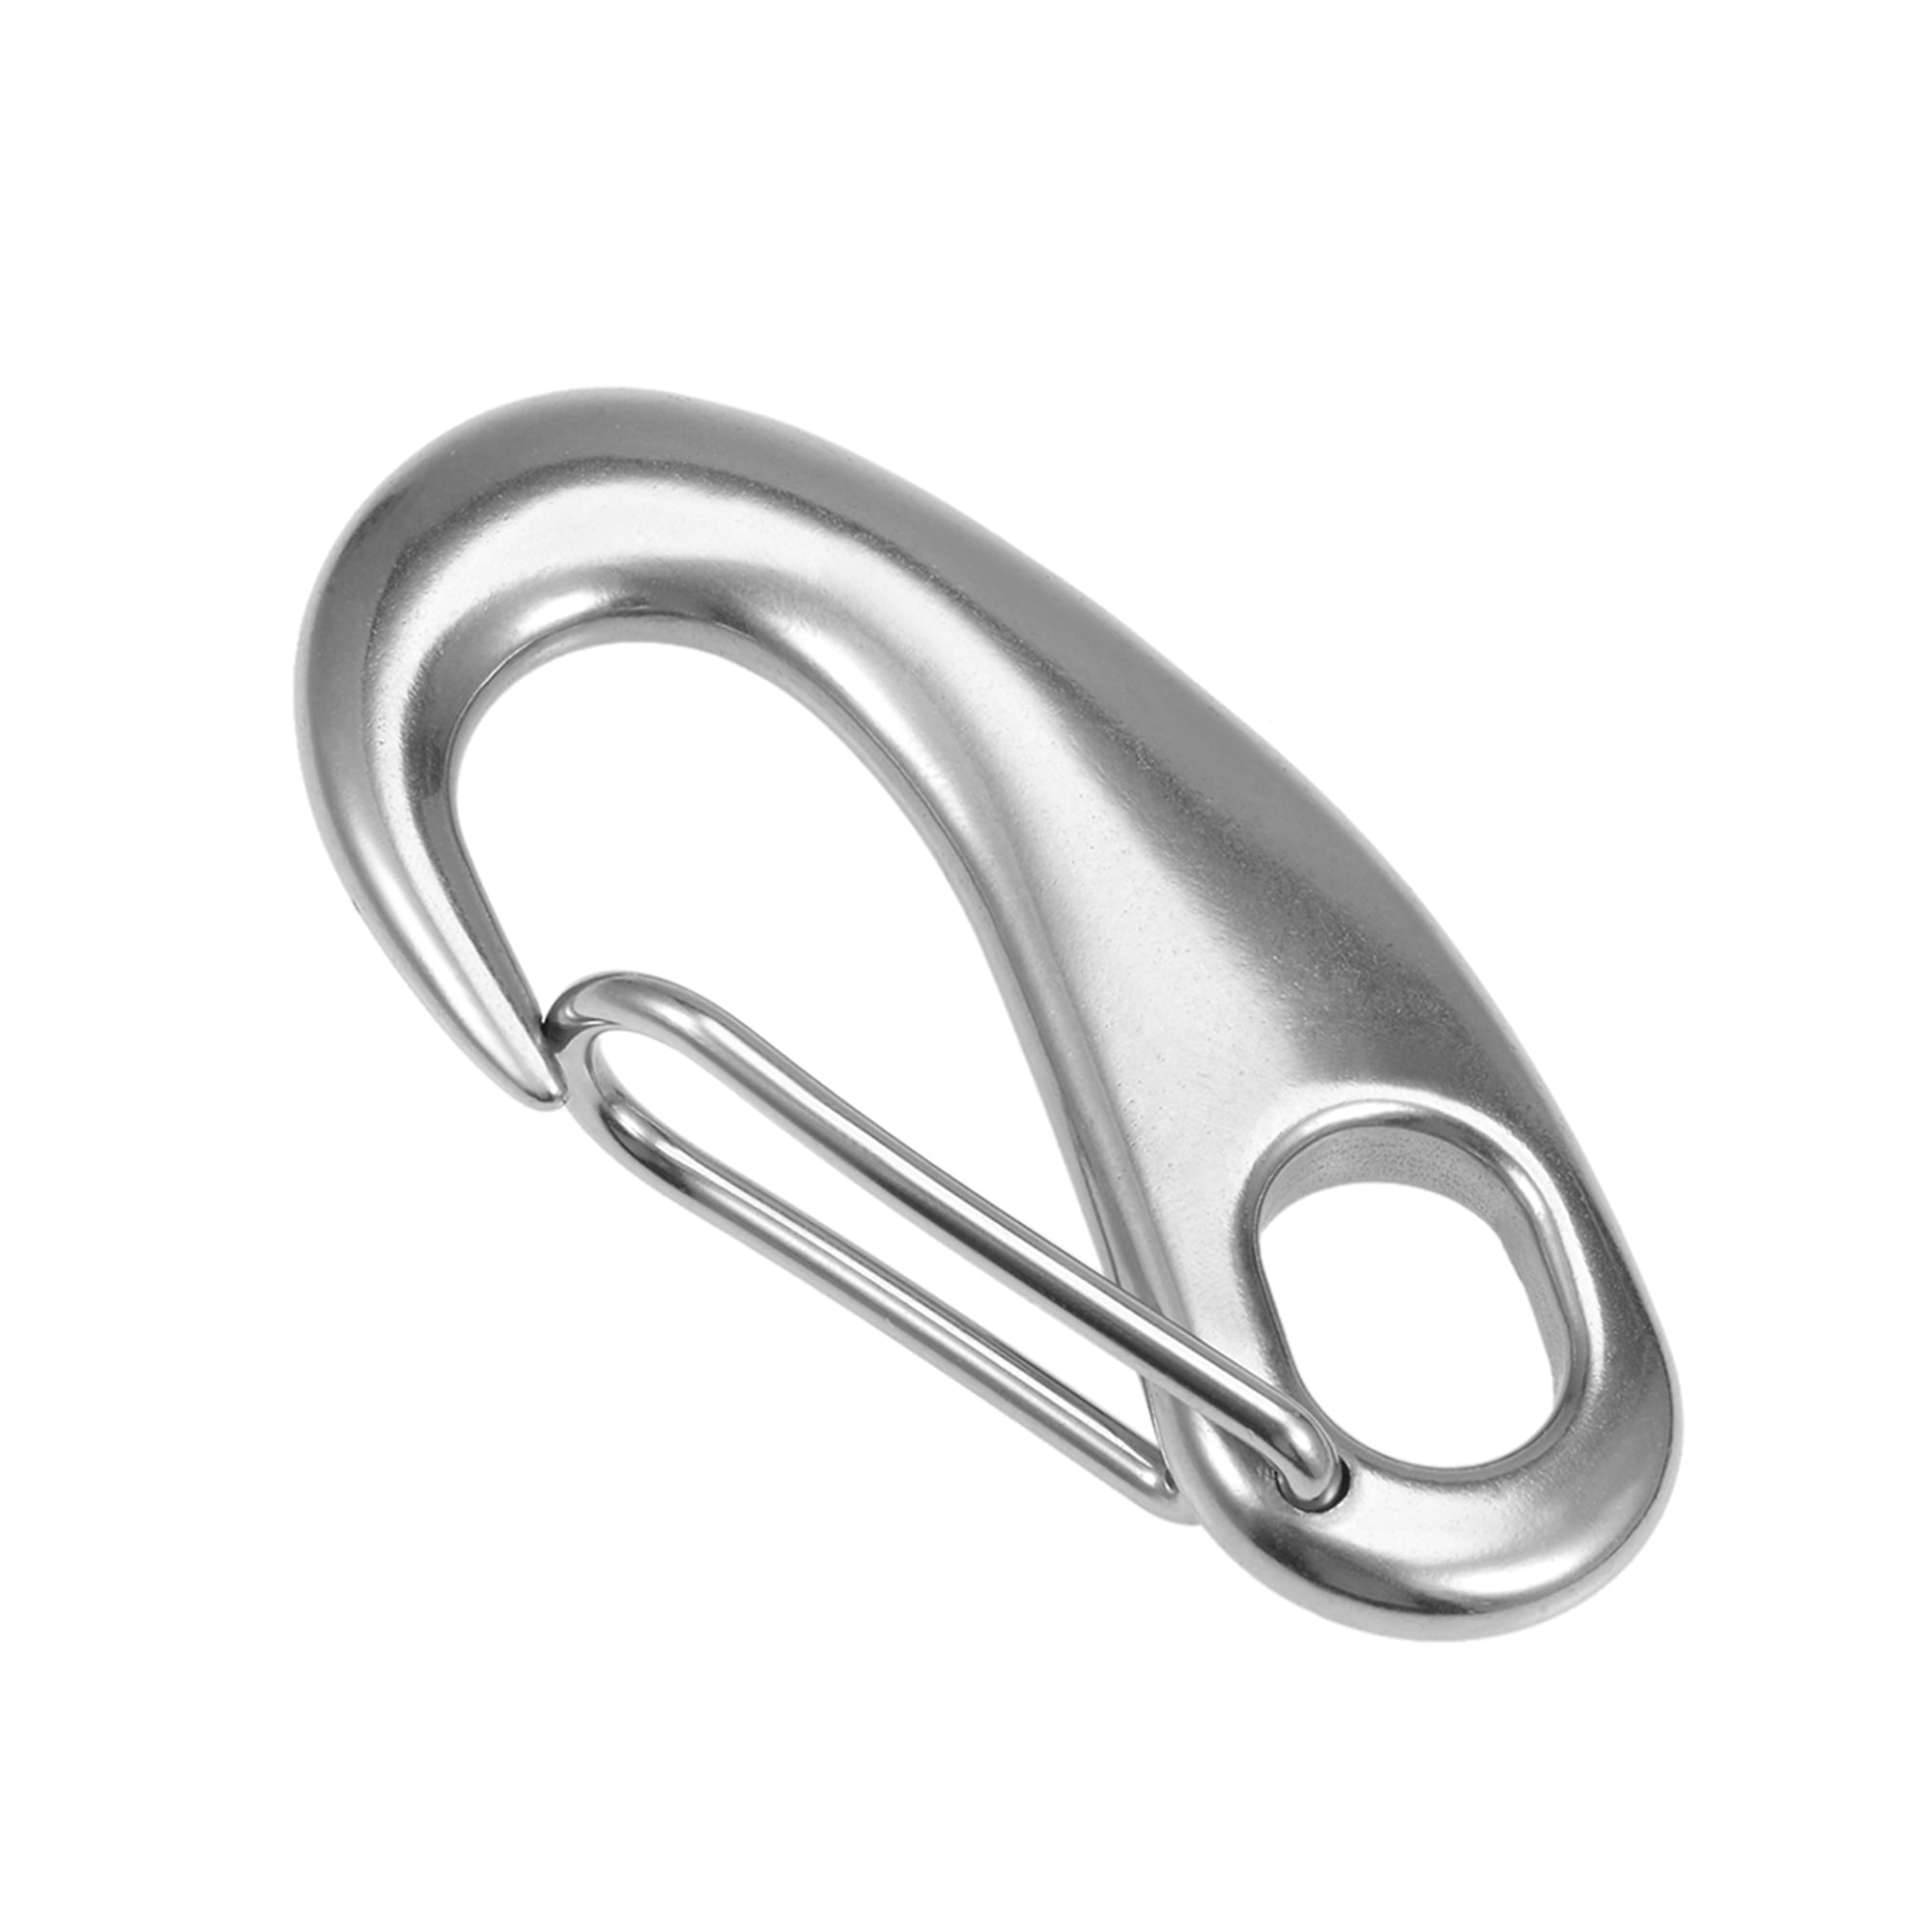 10Pcs 316 Stainless 50mm Spring Gate Snap Hook Clip for Carabiner Hiking 